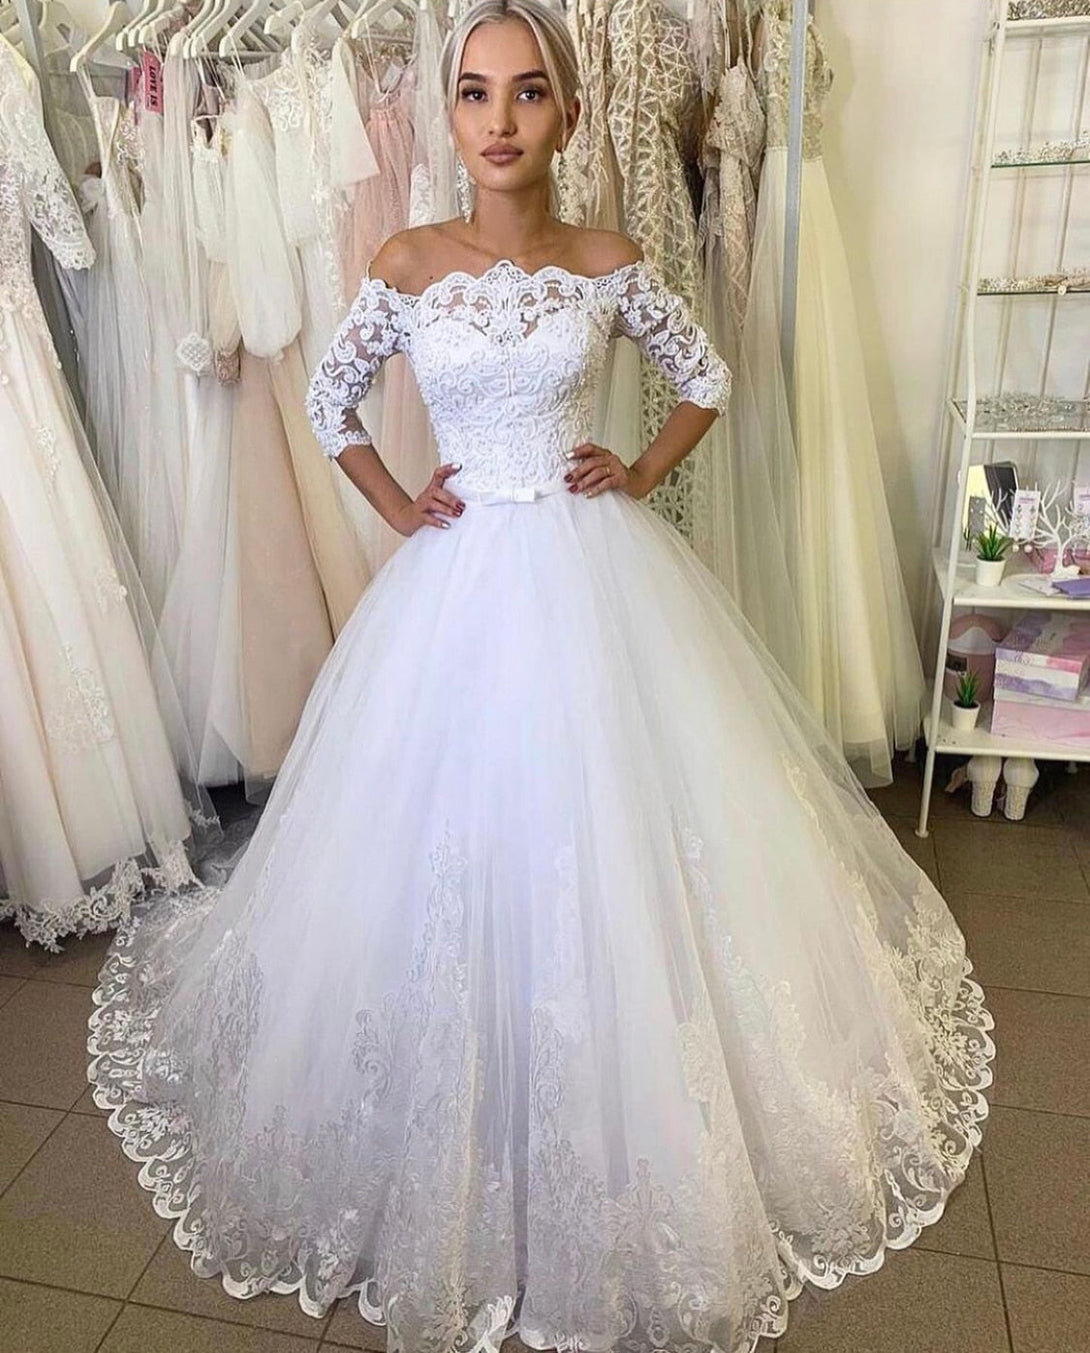 Bella Fancy Dresses US 0 Wedding Dress Ball Boat Neck Three Quarter Lace Appliques Beads Bow Floor Length Sweep Train Gorgeous Bridal Gown Custom Made